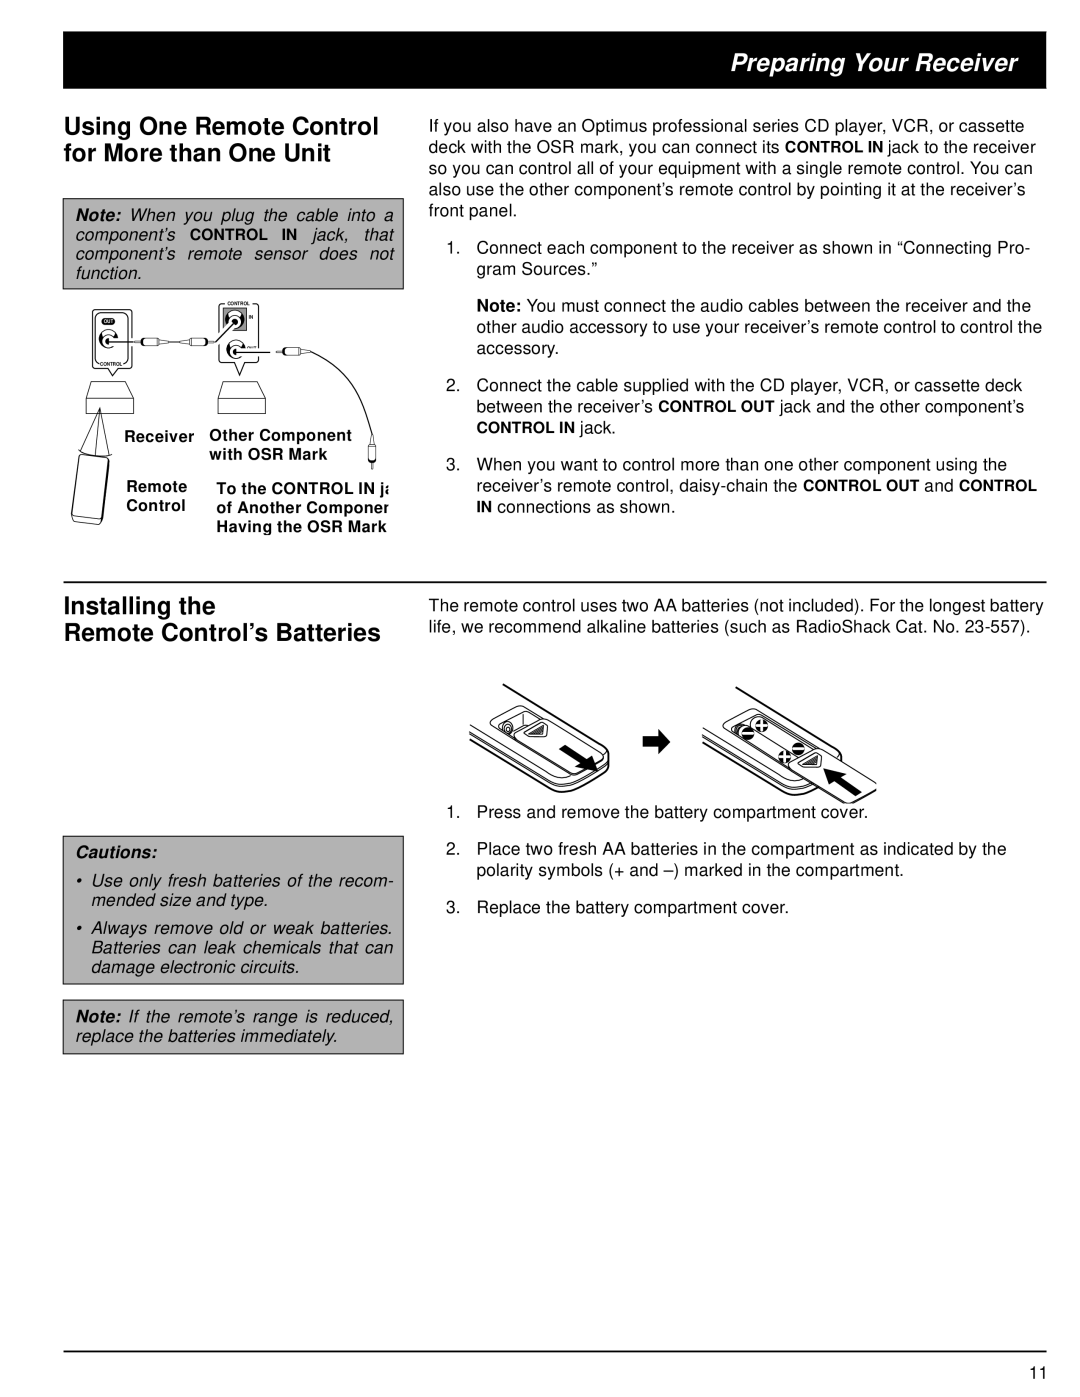 Optimus STA-3500 owner manual Installing the Remote Control’s Batteries, Cautions, Preparing Your Receiver 